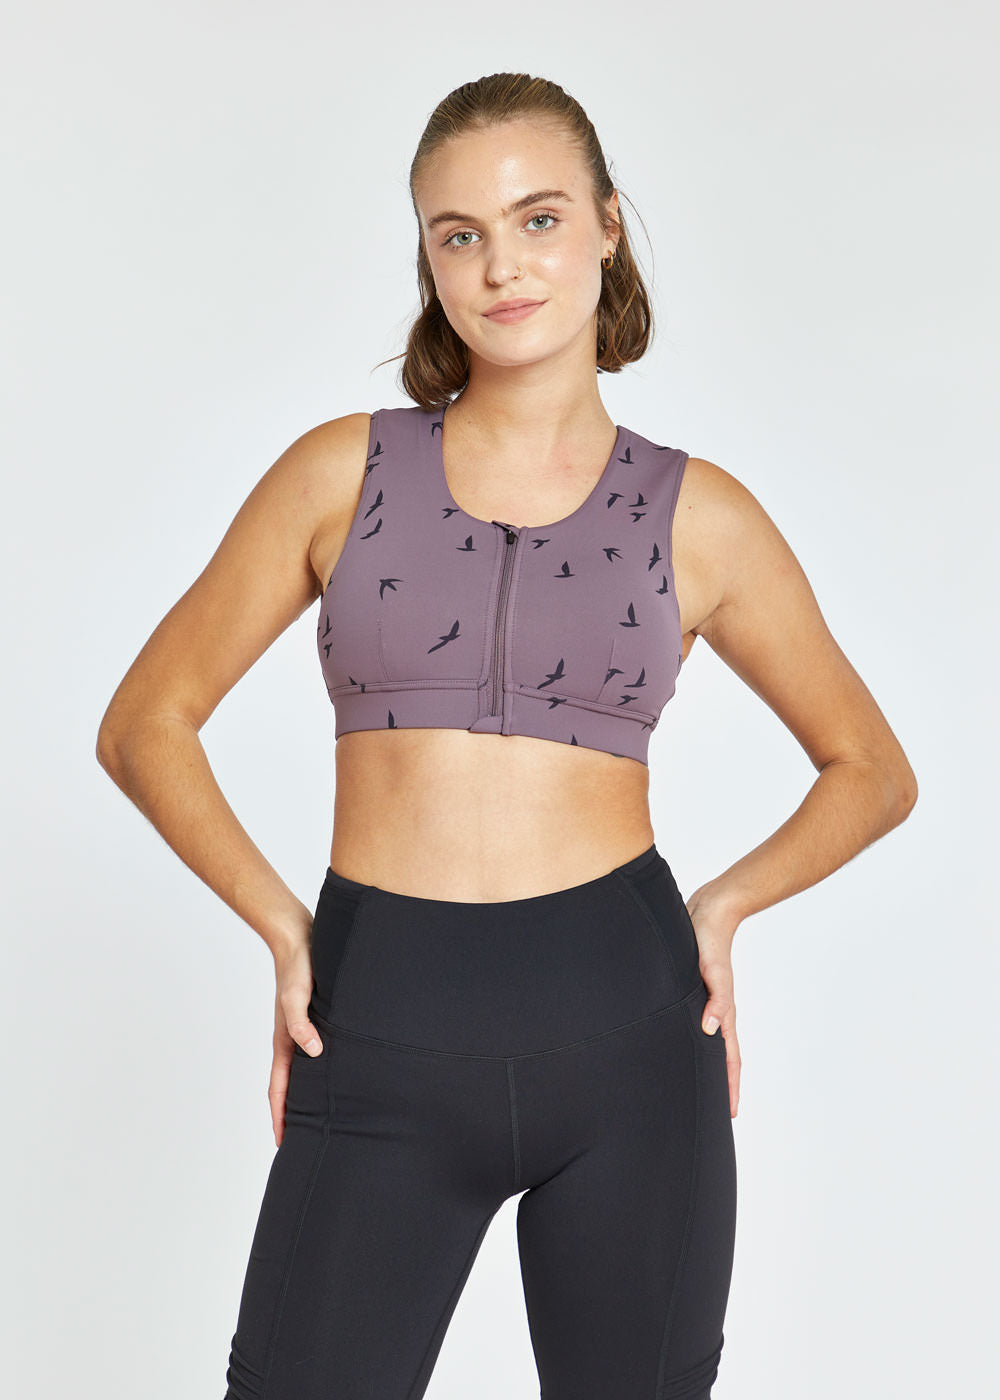 Oiselle Flagship University Village - The In2Sports Bra is here! This is a  sports bra with benefits. When you buy one of our In2Sports Bras, we donate  one to our Bras for